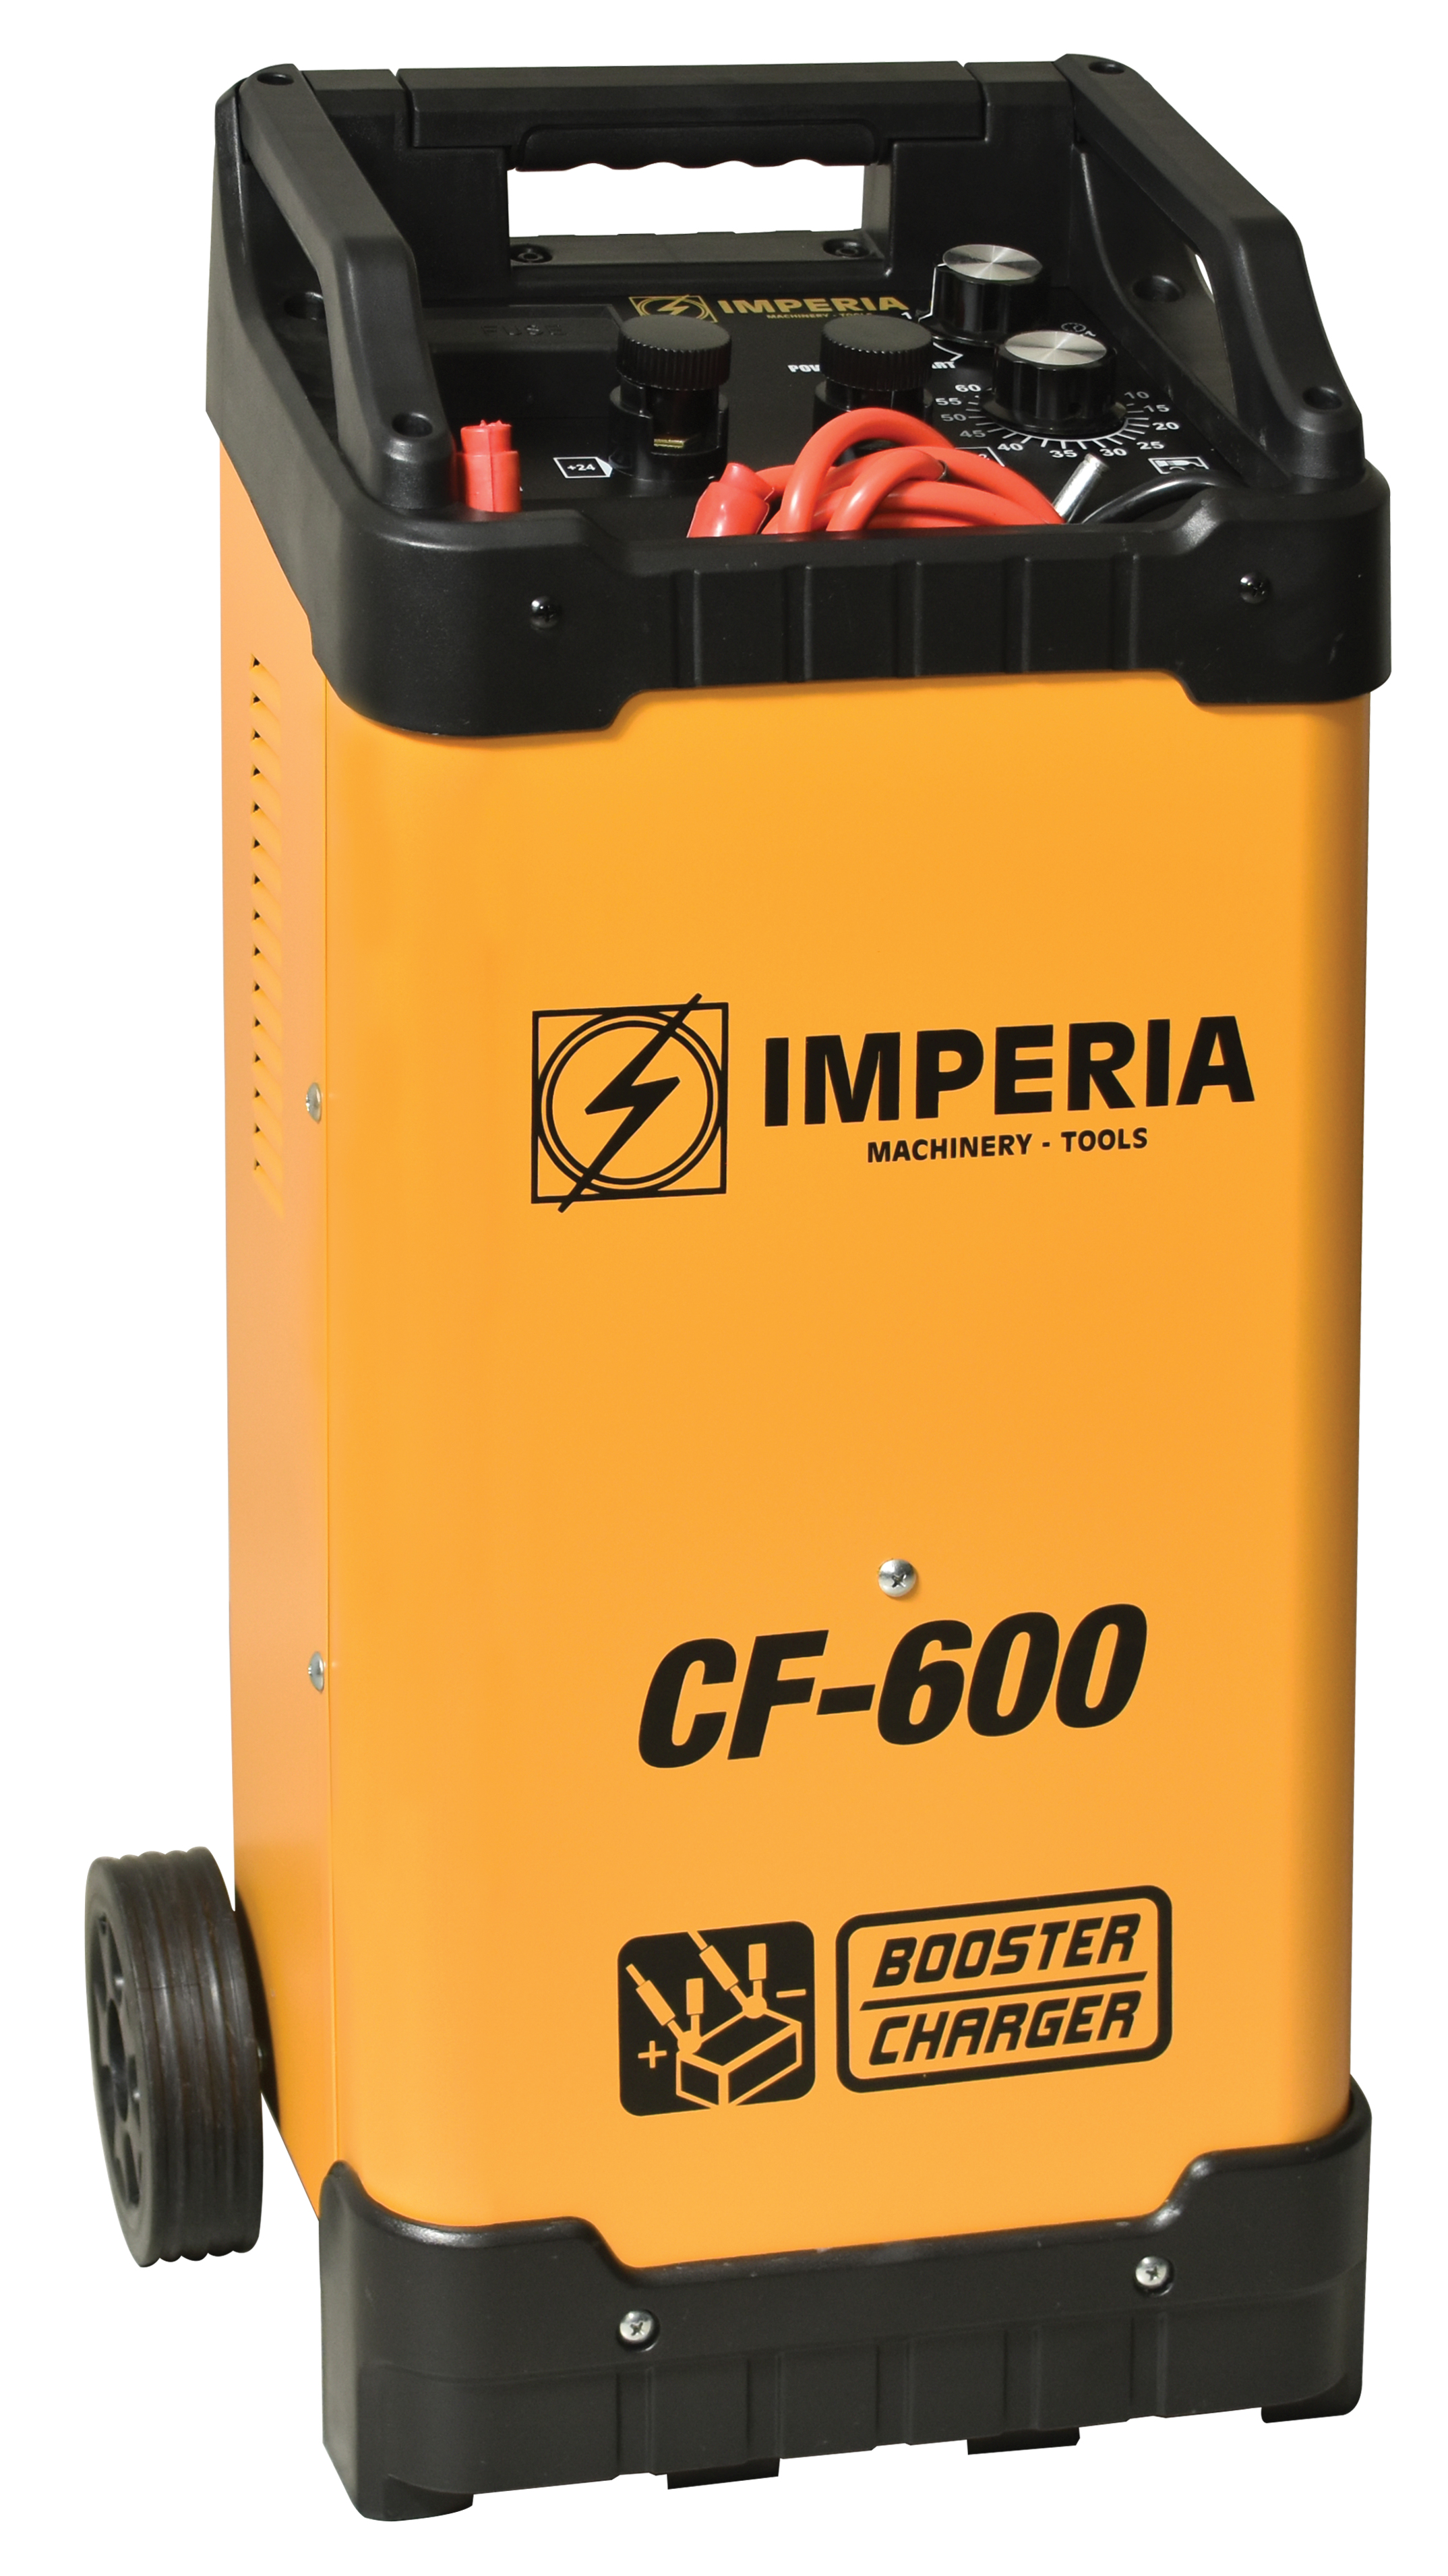 Charger - Jump Starter CF-600 Imperia